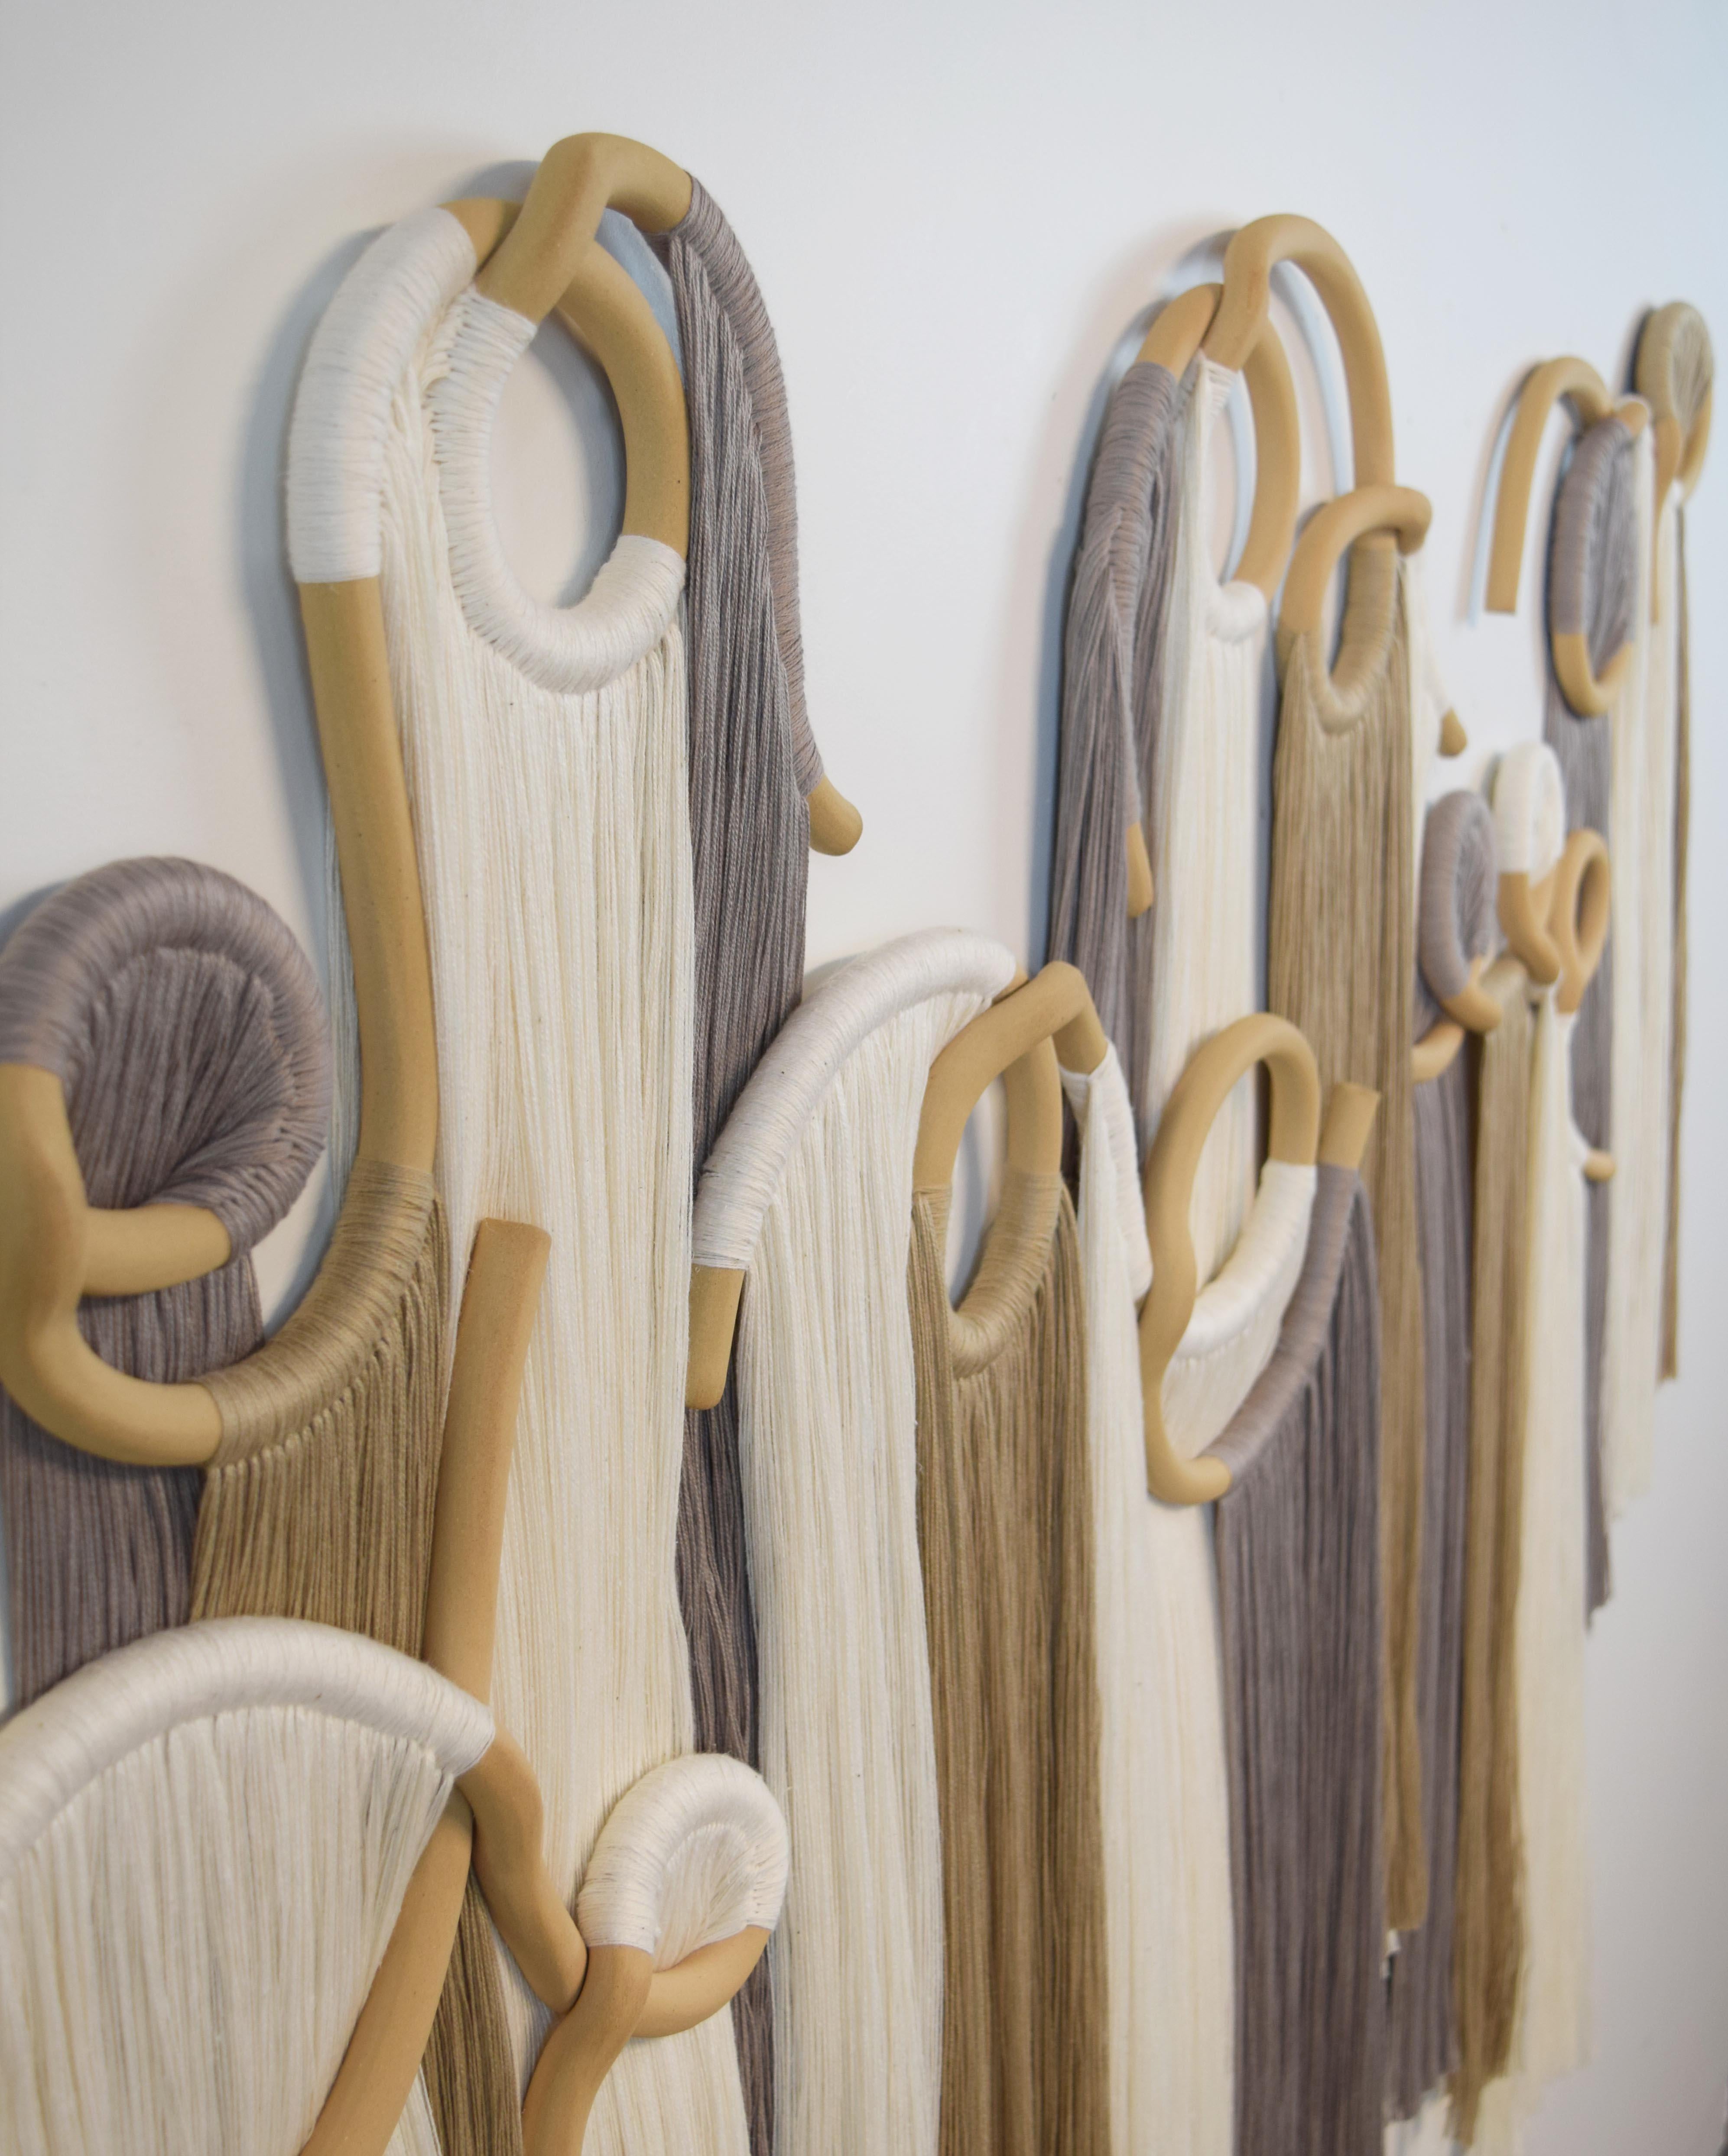 Wall Sculpture #765 by Karen Gayle Tinney

Six panel wall sculpture. Hand formed ceramic pieces in unglazed beige stoneware with white, tan, and gray cotton fringe. Hanging wires are included on each panel. Ships with a small comb for fringe and